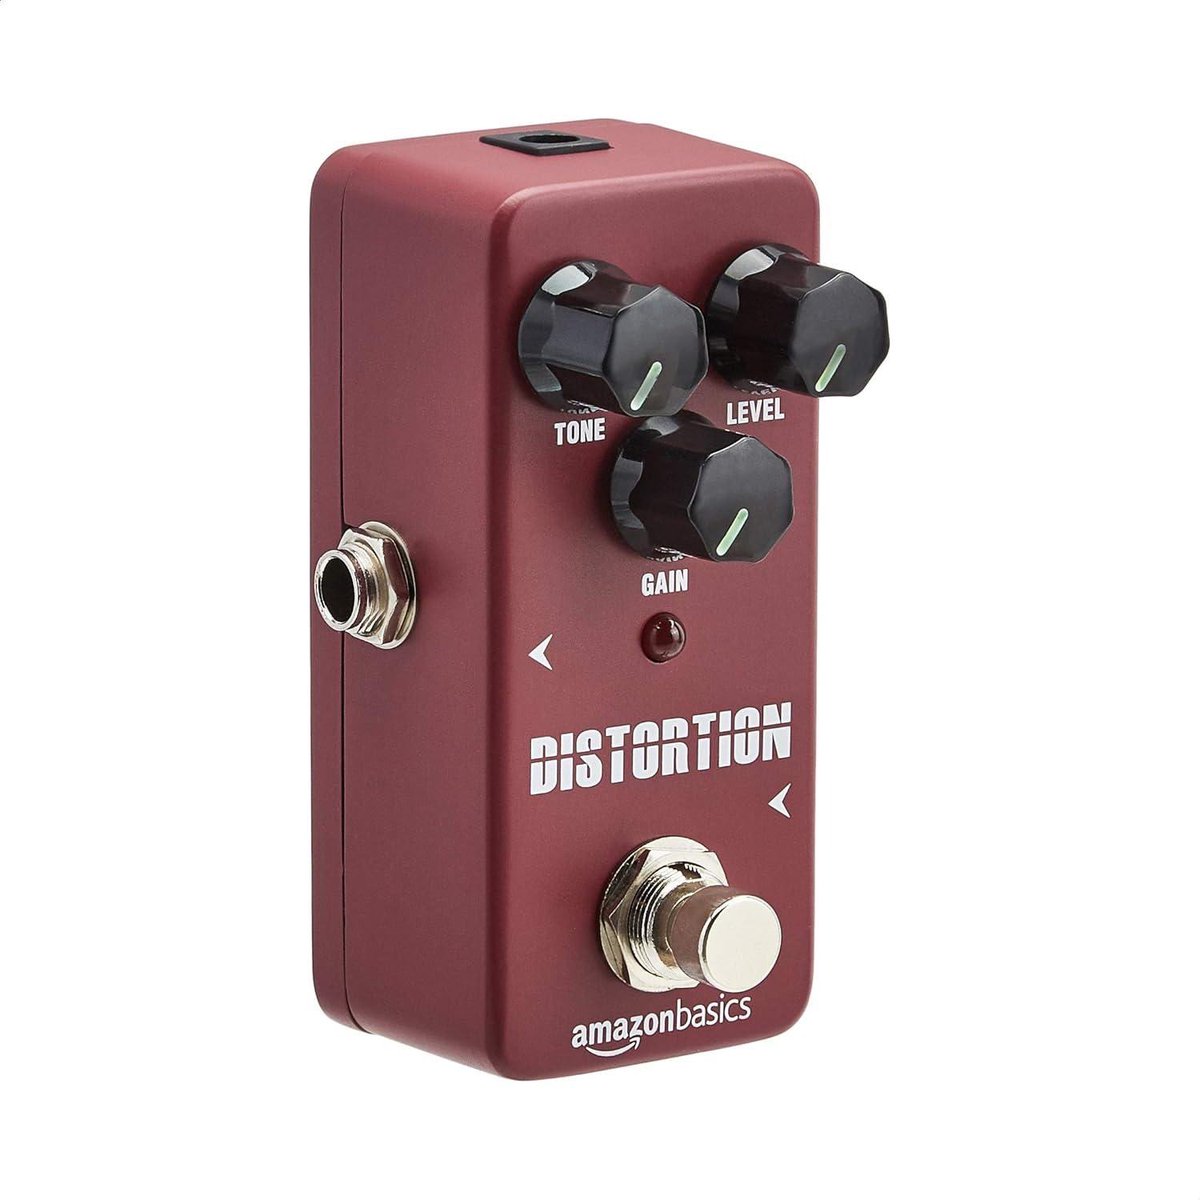 Babe, what’s wrong? You’ve barely touched your amazon basics distortion pedal.